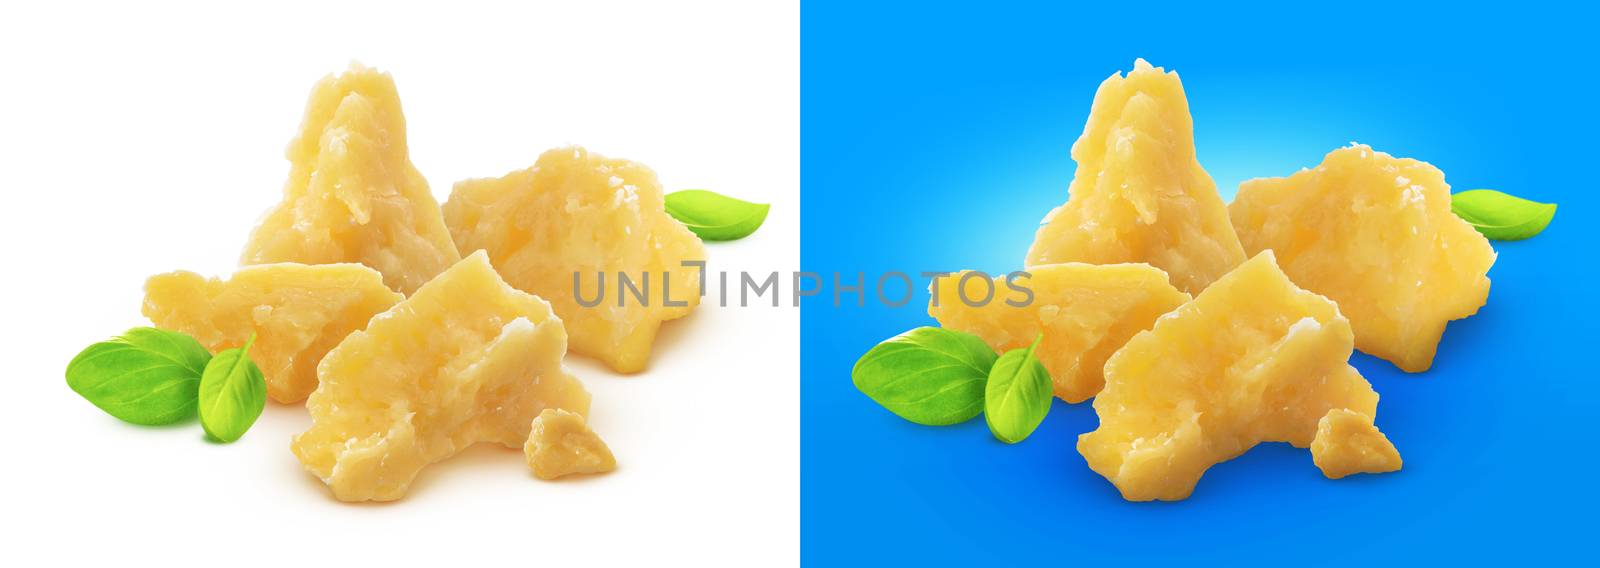 Parmigiano. Pieces of parmesan cheese isolated on white background with clipping path